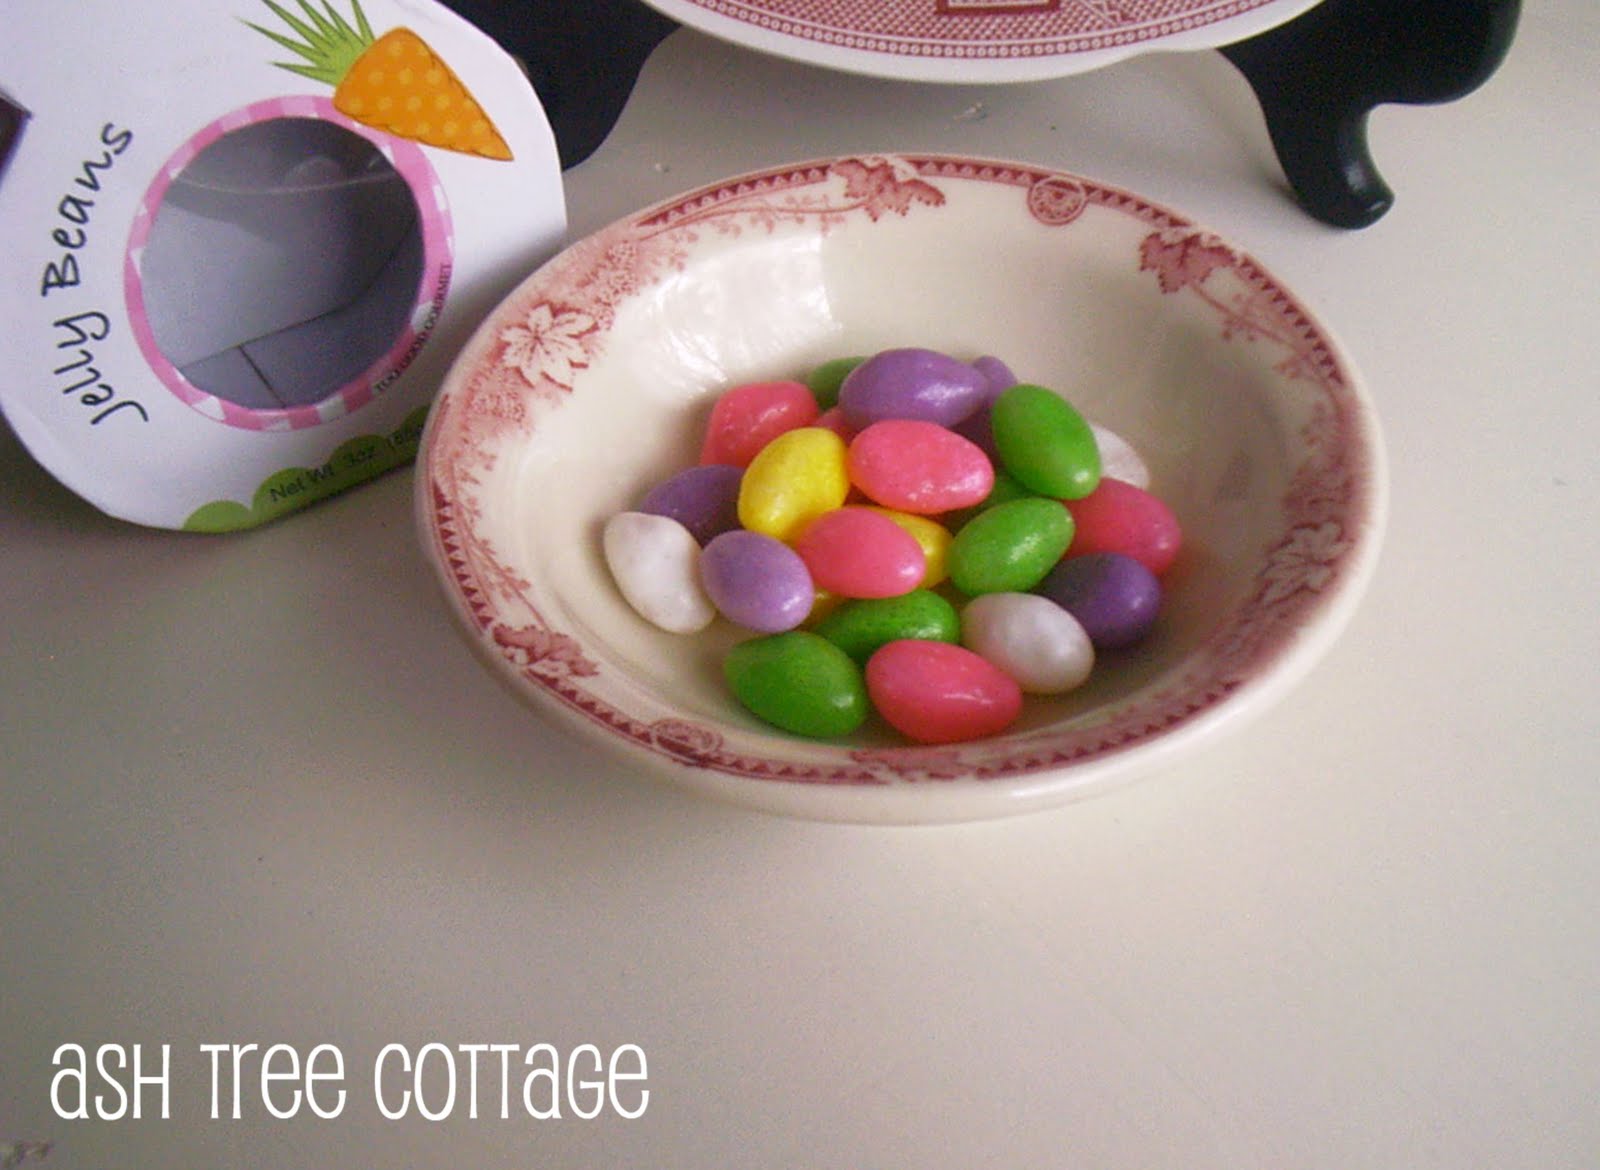 Ash Tree Cottage: Wishing You a Blessed Easter